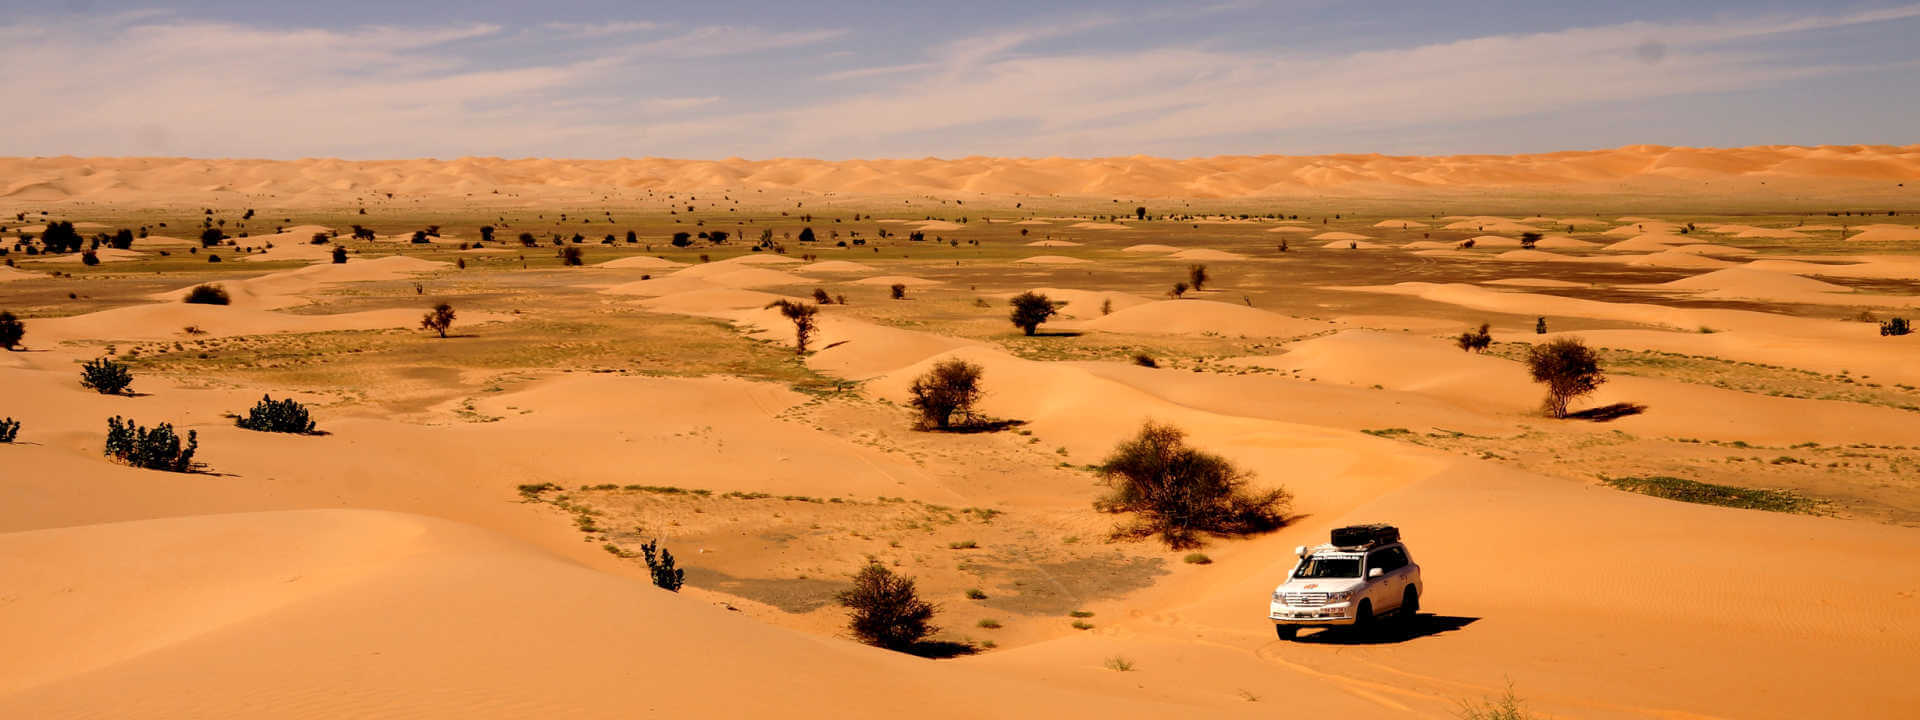 Vehicle on epic journey across the dune in Western Sahara